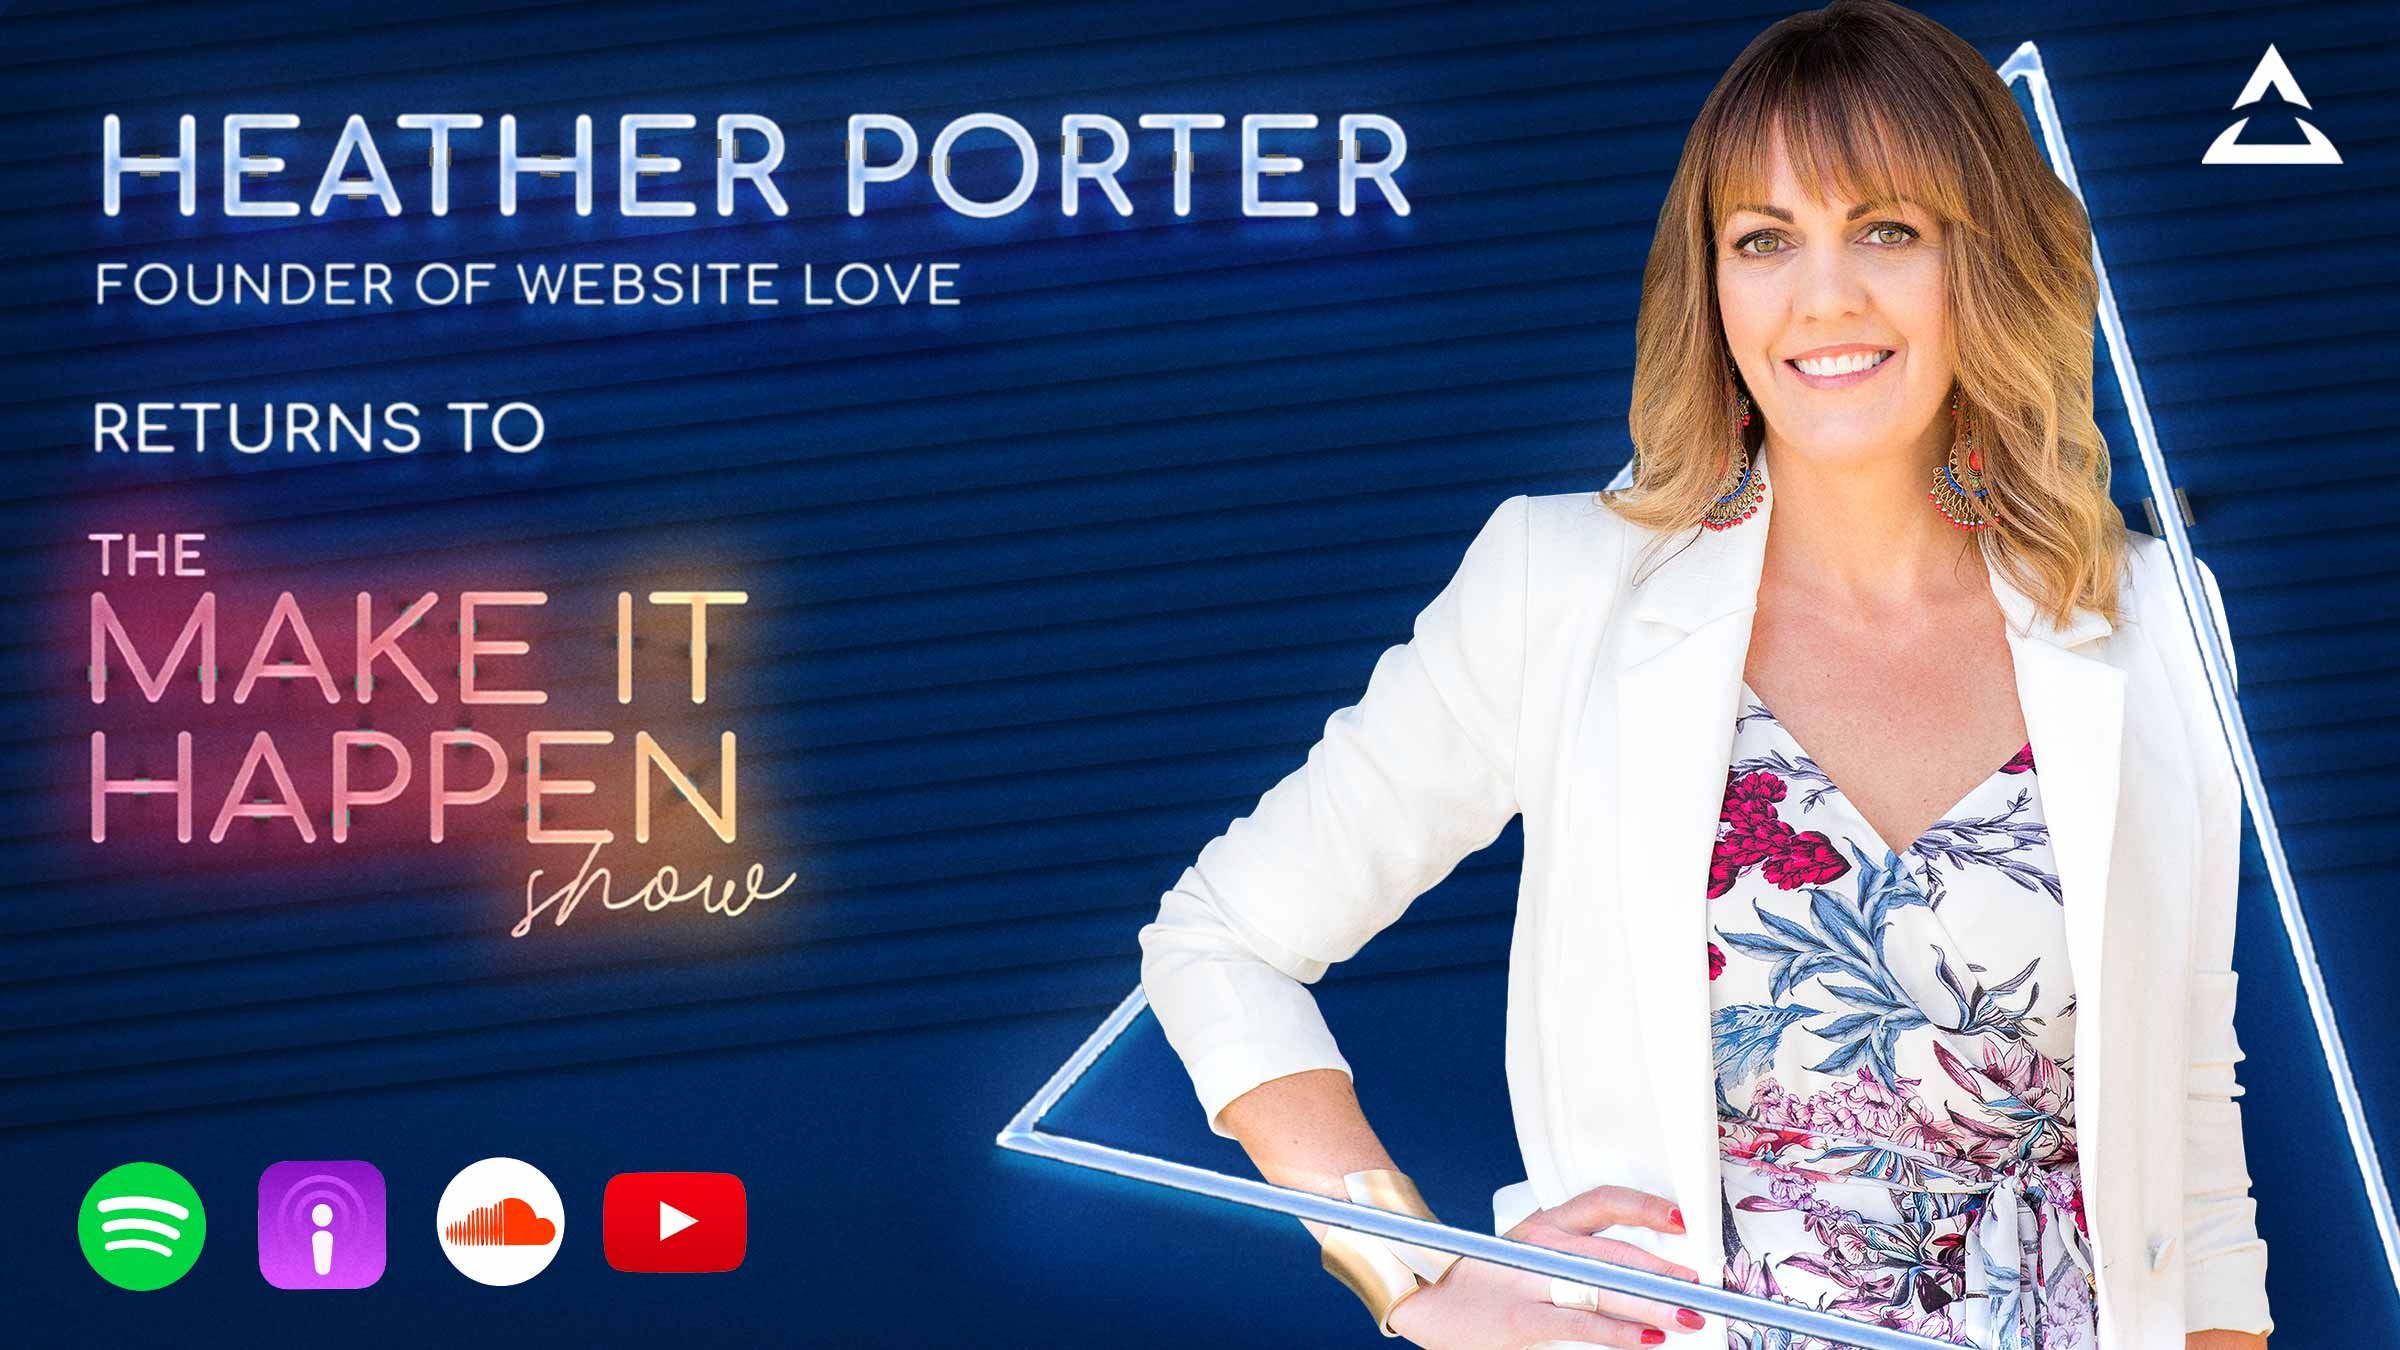 Heather Porter, Founder of Website Love returns to The Make It Happen Show